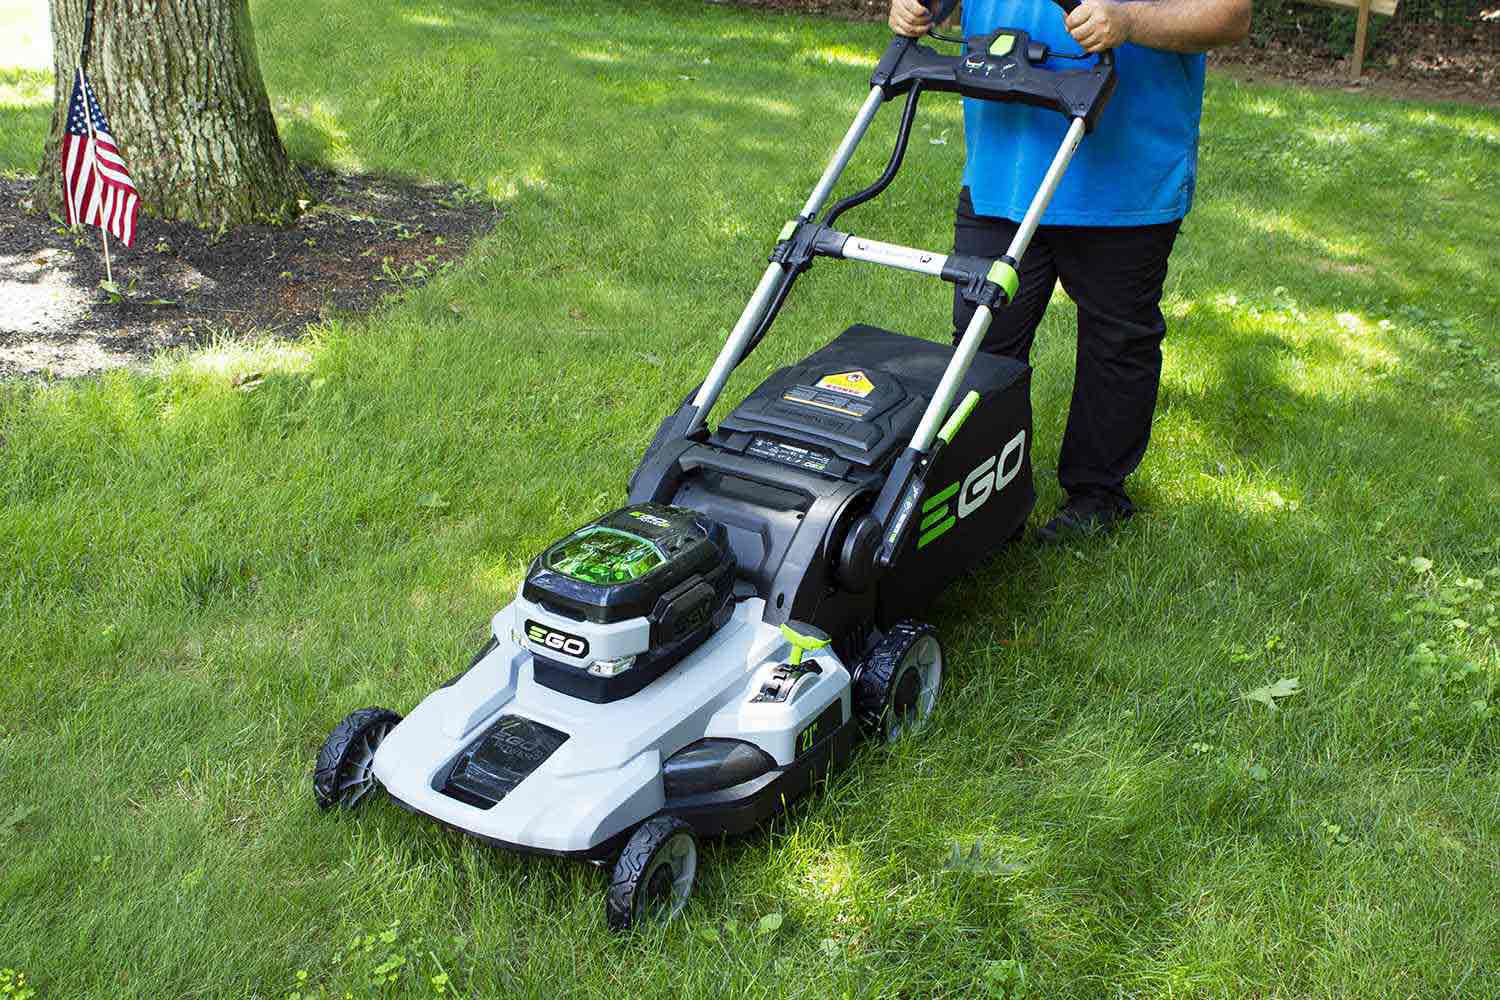 The Best Battery-Powered Lawn Mowers, According to a Lawn Care Expert